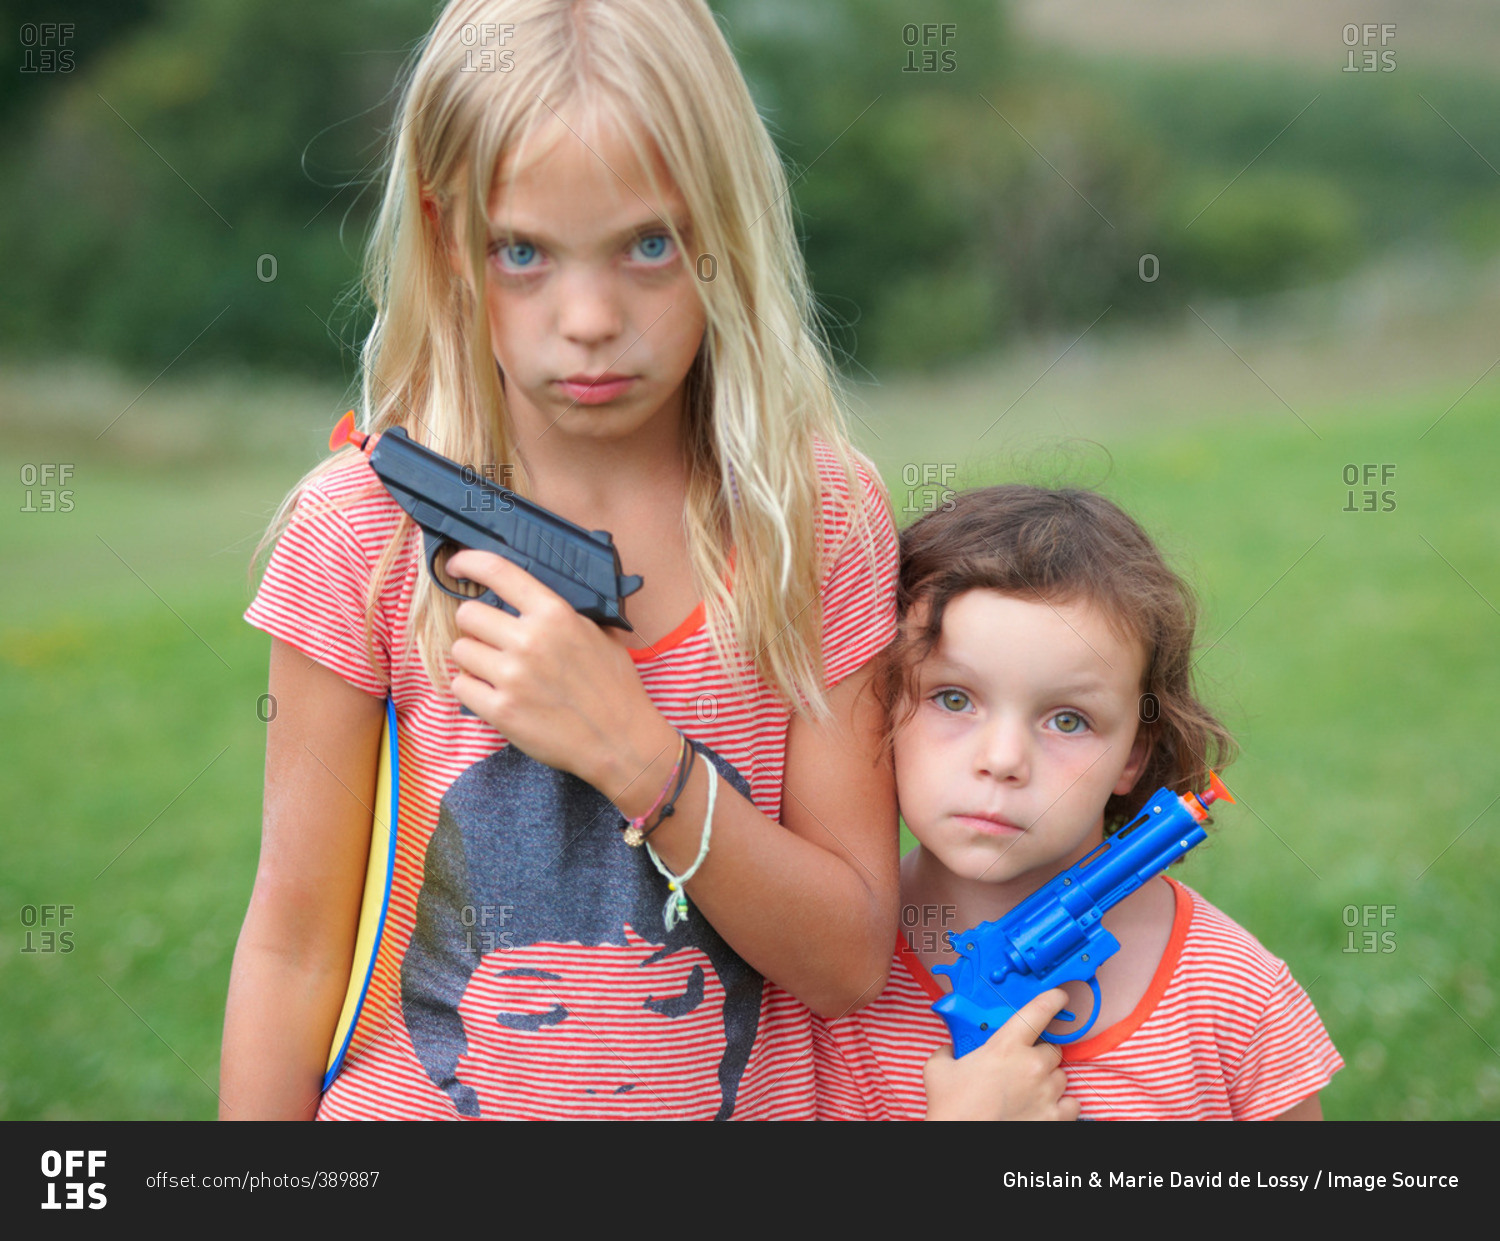 Portrait of two young sisters, holding toy guns